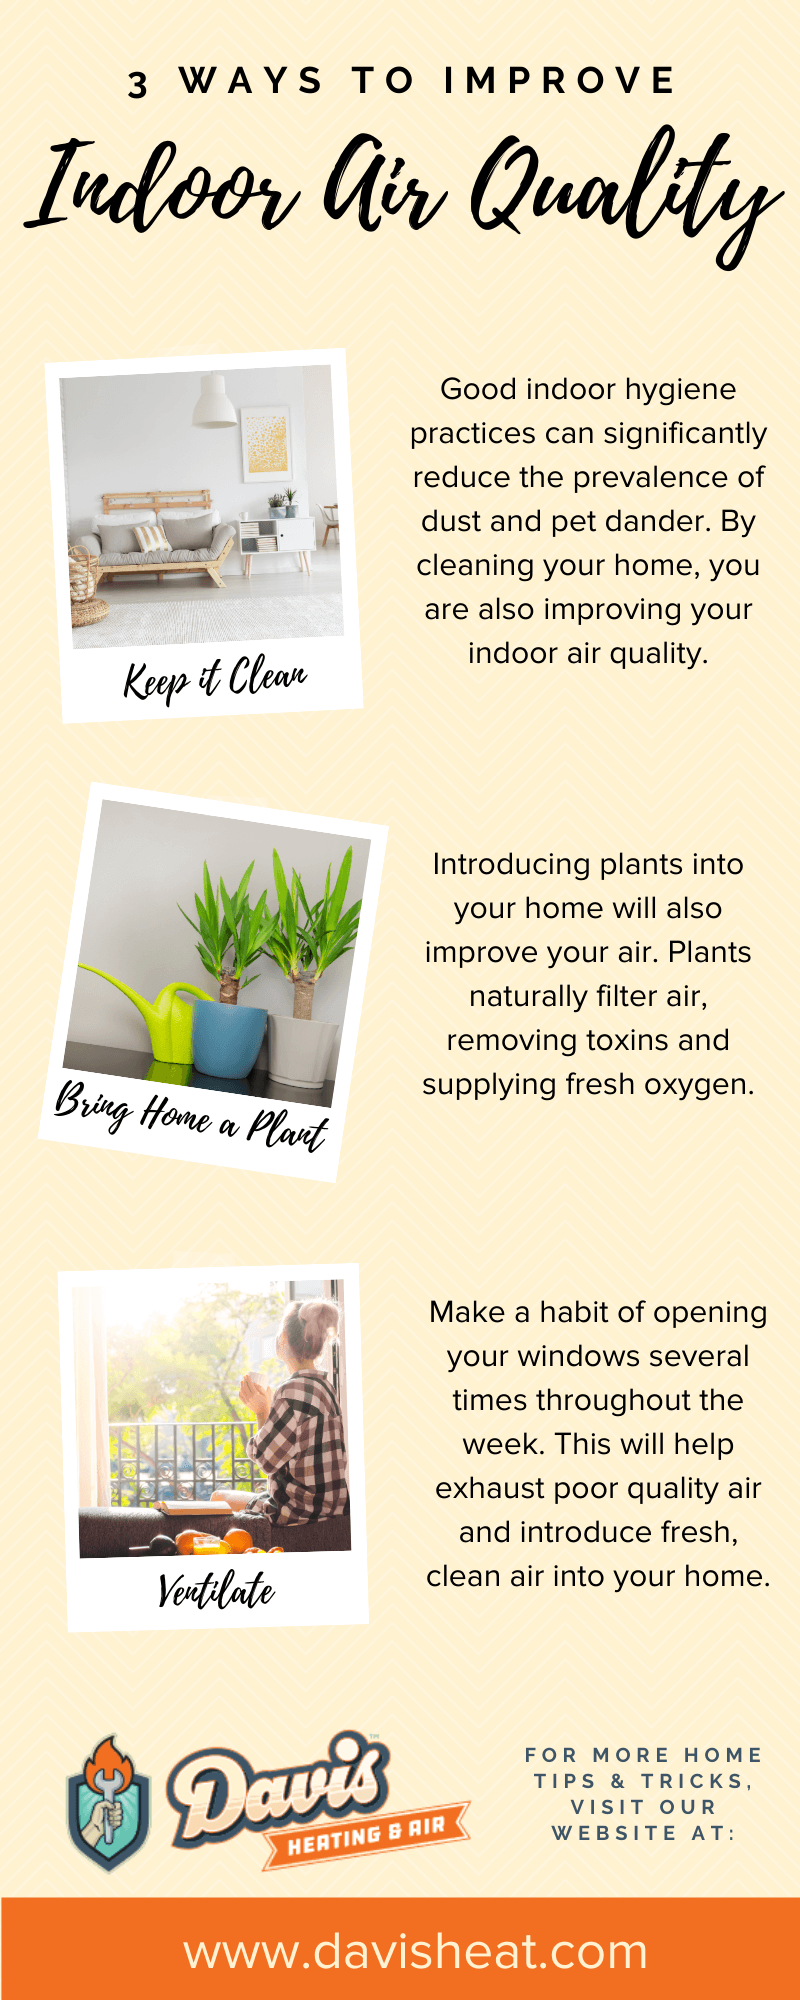 3 Ways to Improve Indoor Air Quality infographic